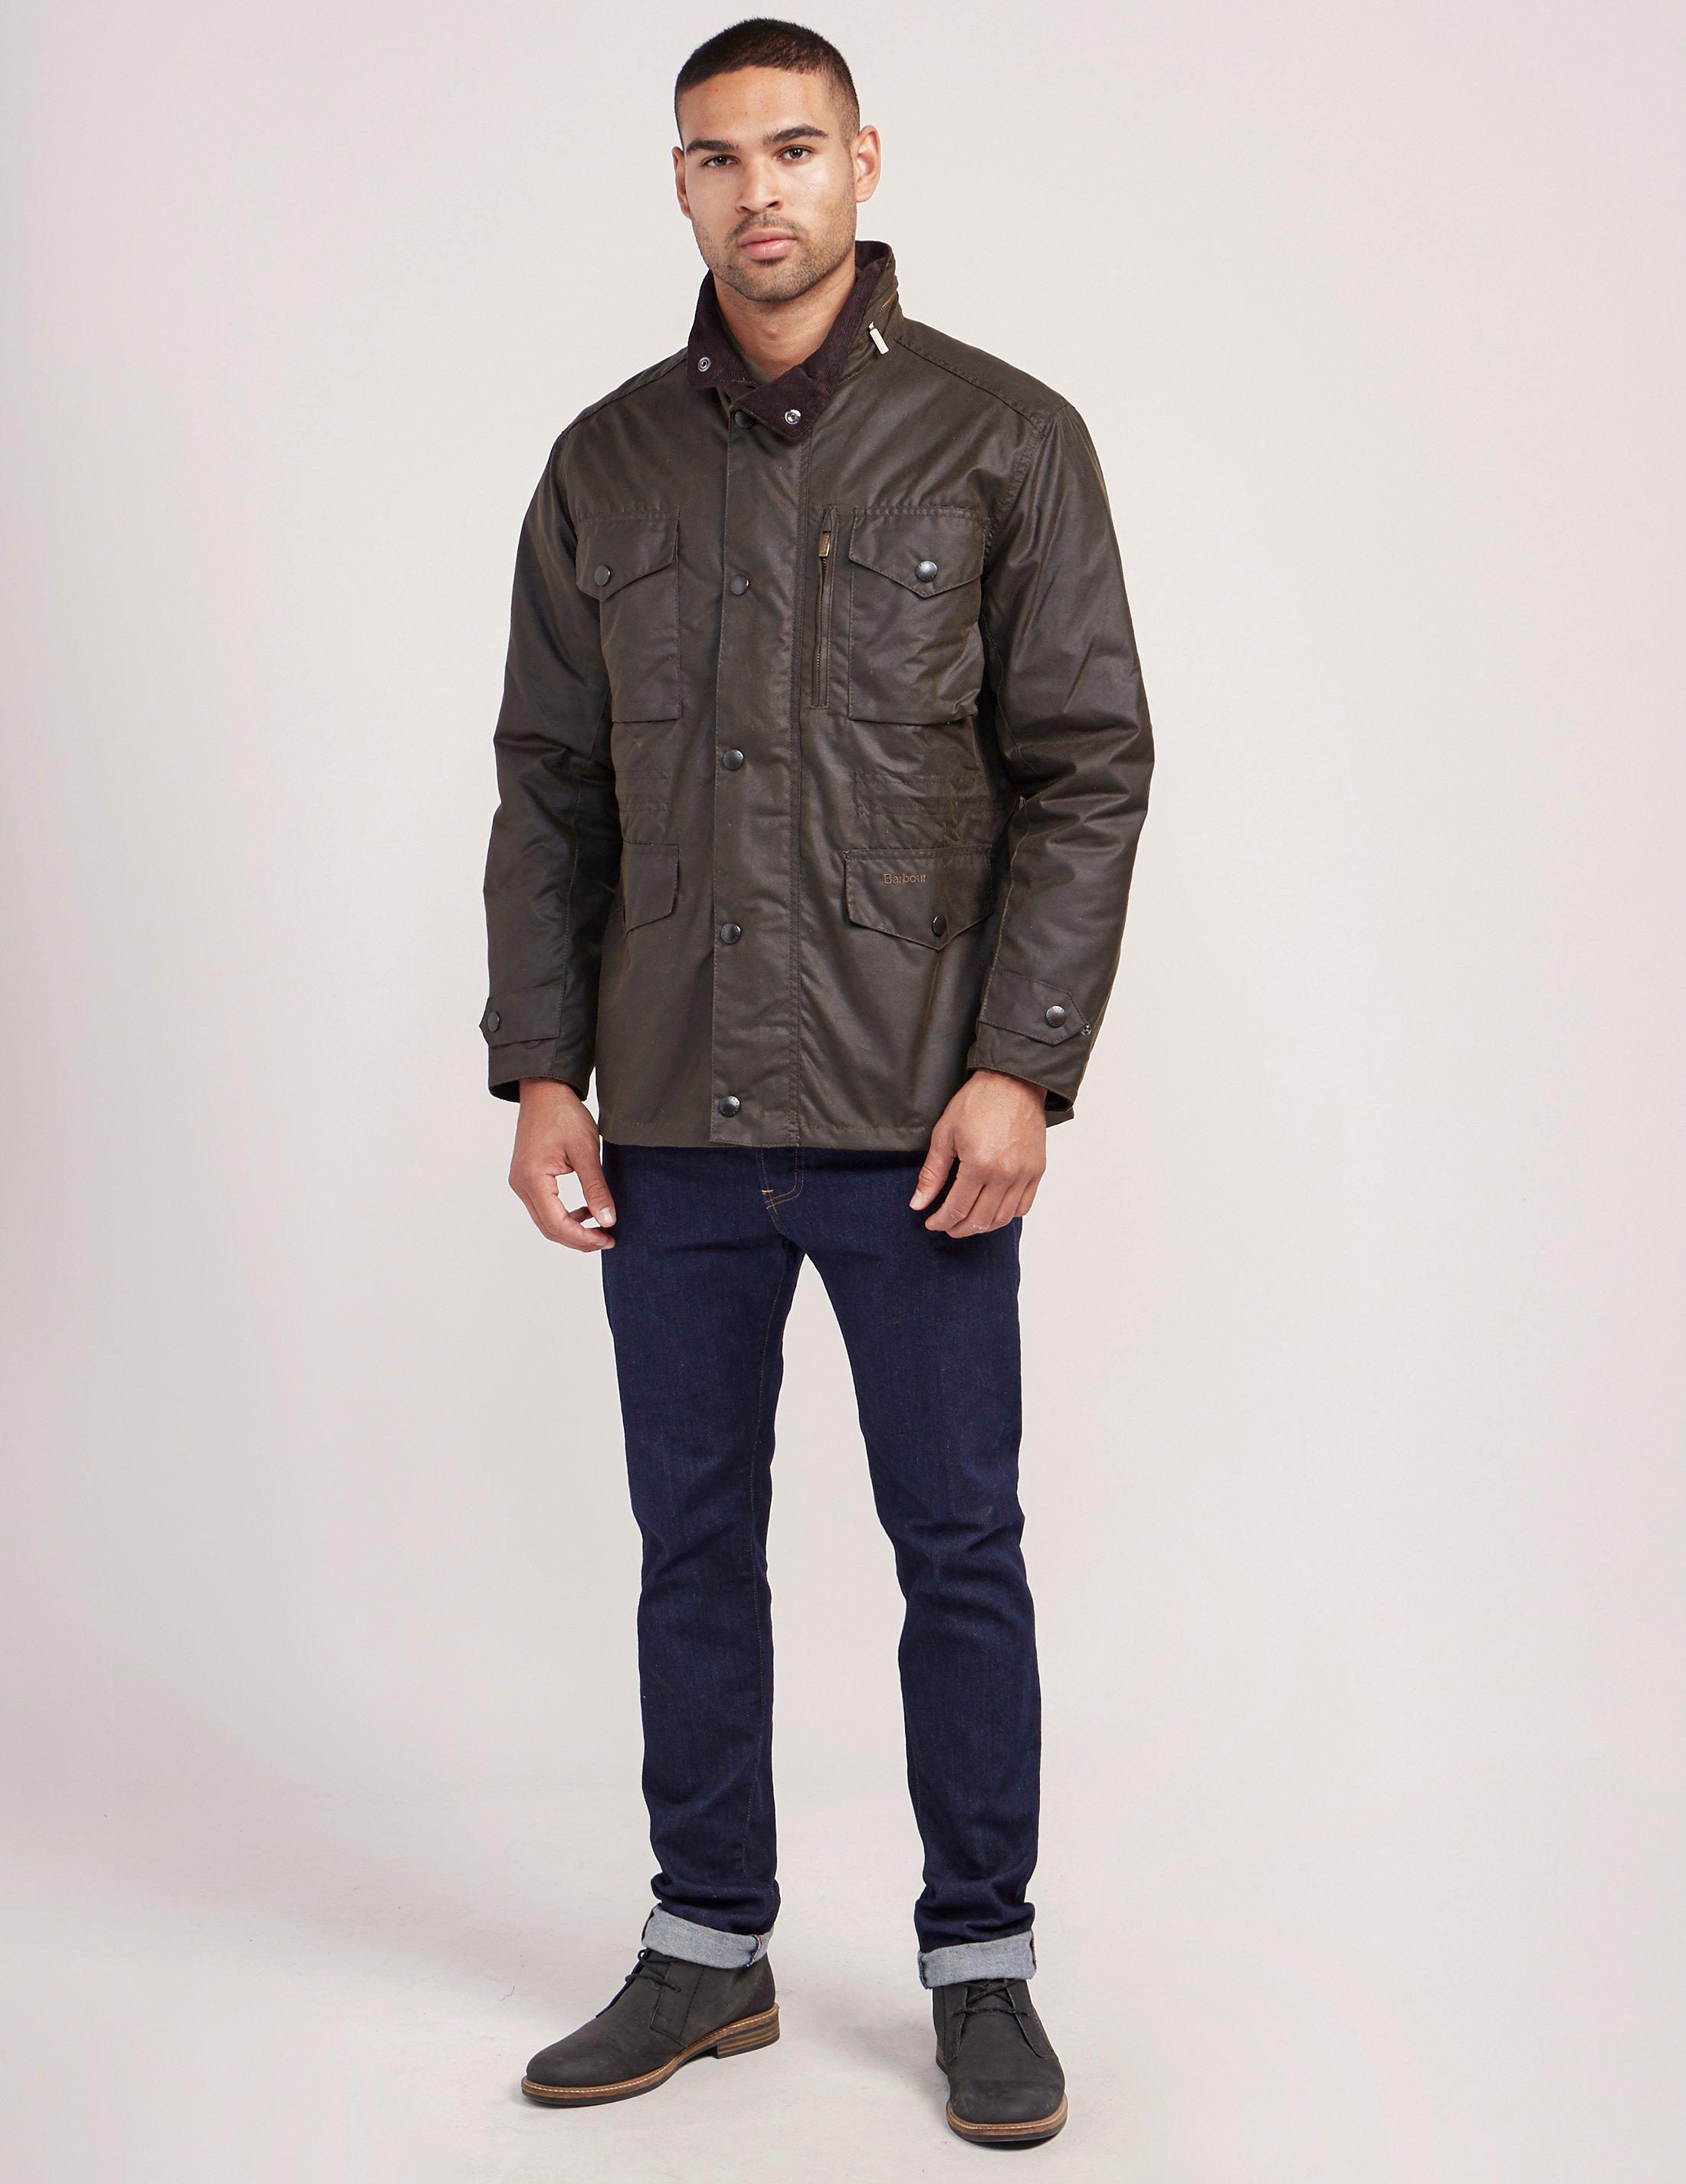 Barbour Cotton Sapper Wax Jacket in Brown for Men - Lyst